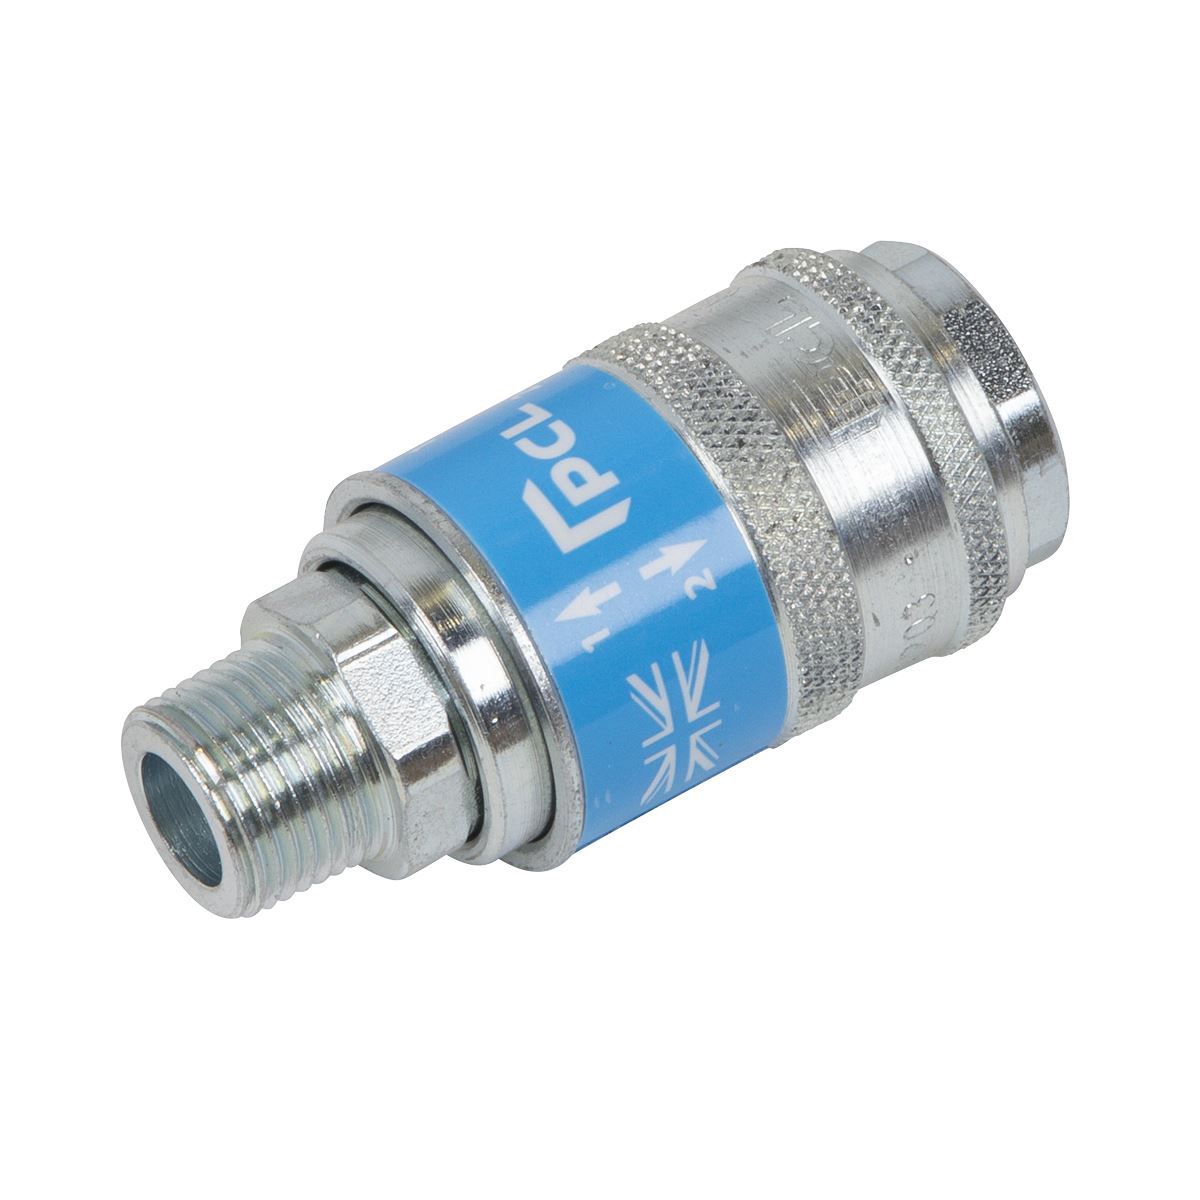 PCL Safeflow Safety Coupling Body Male 3/8"BSPT